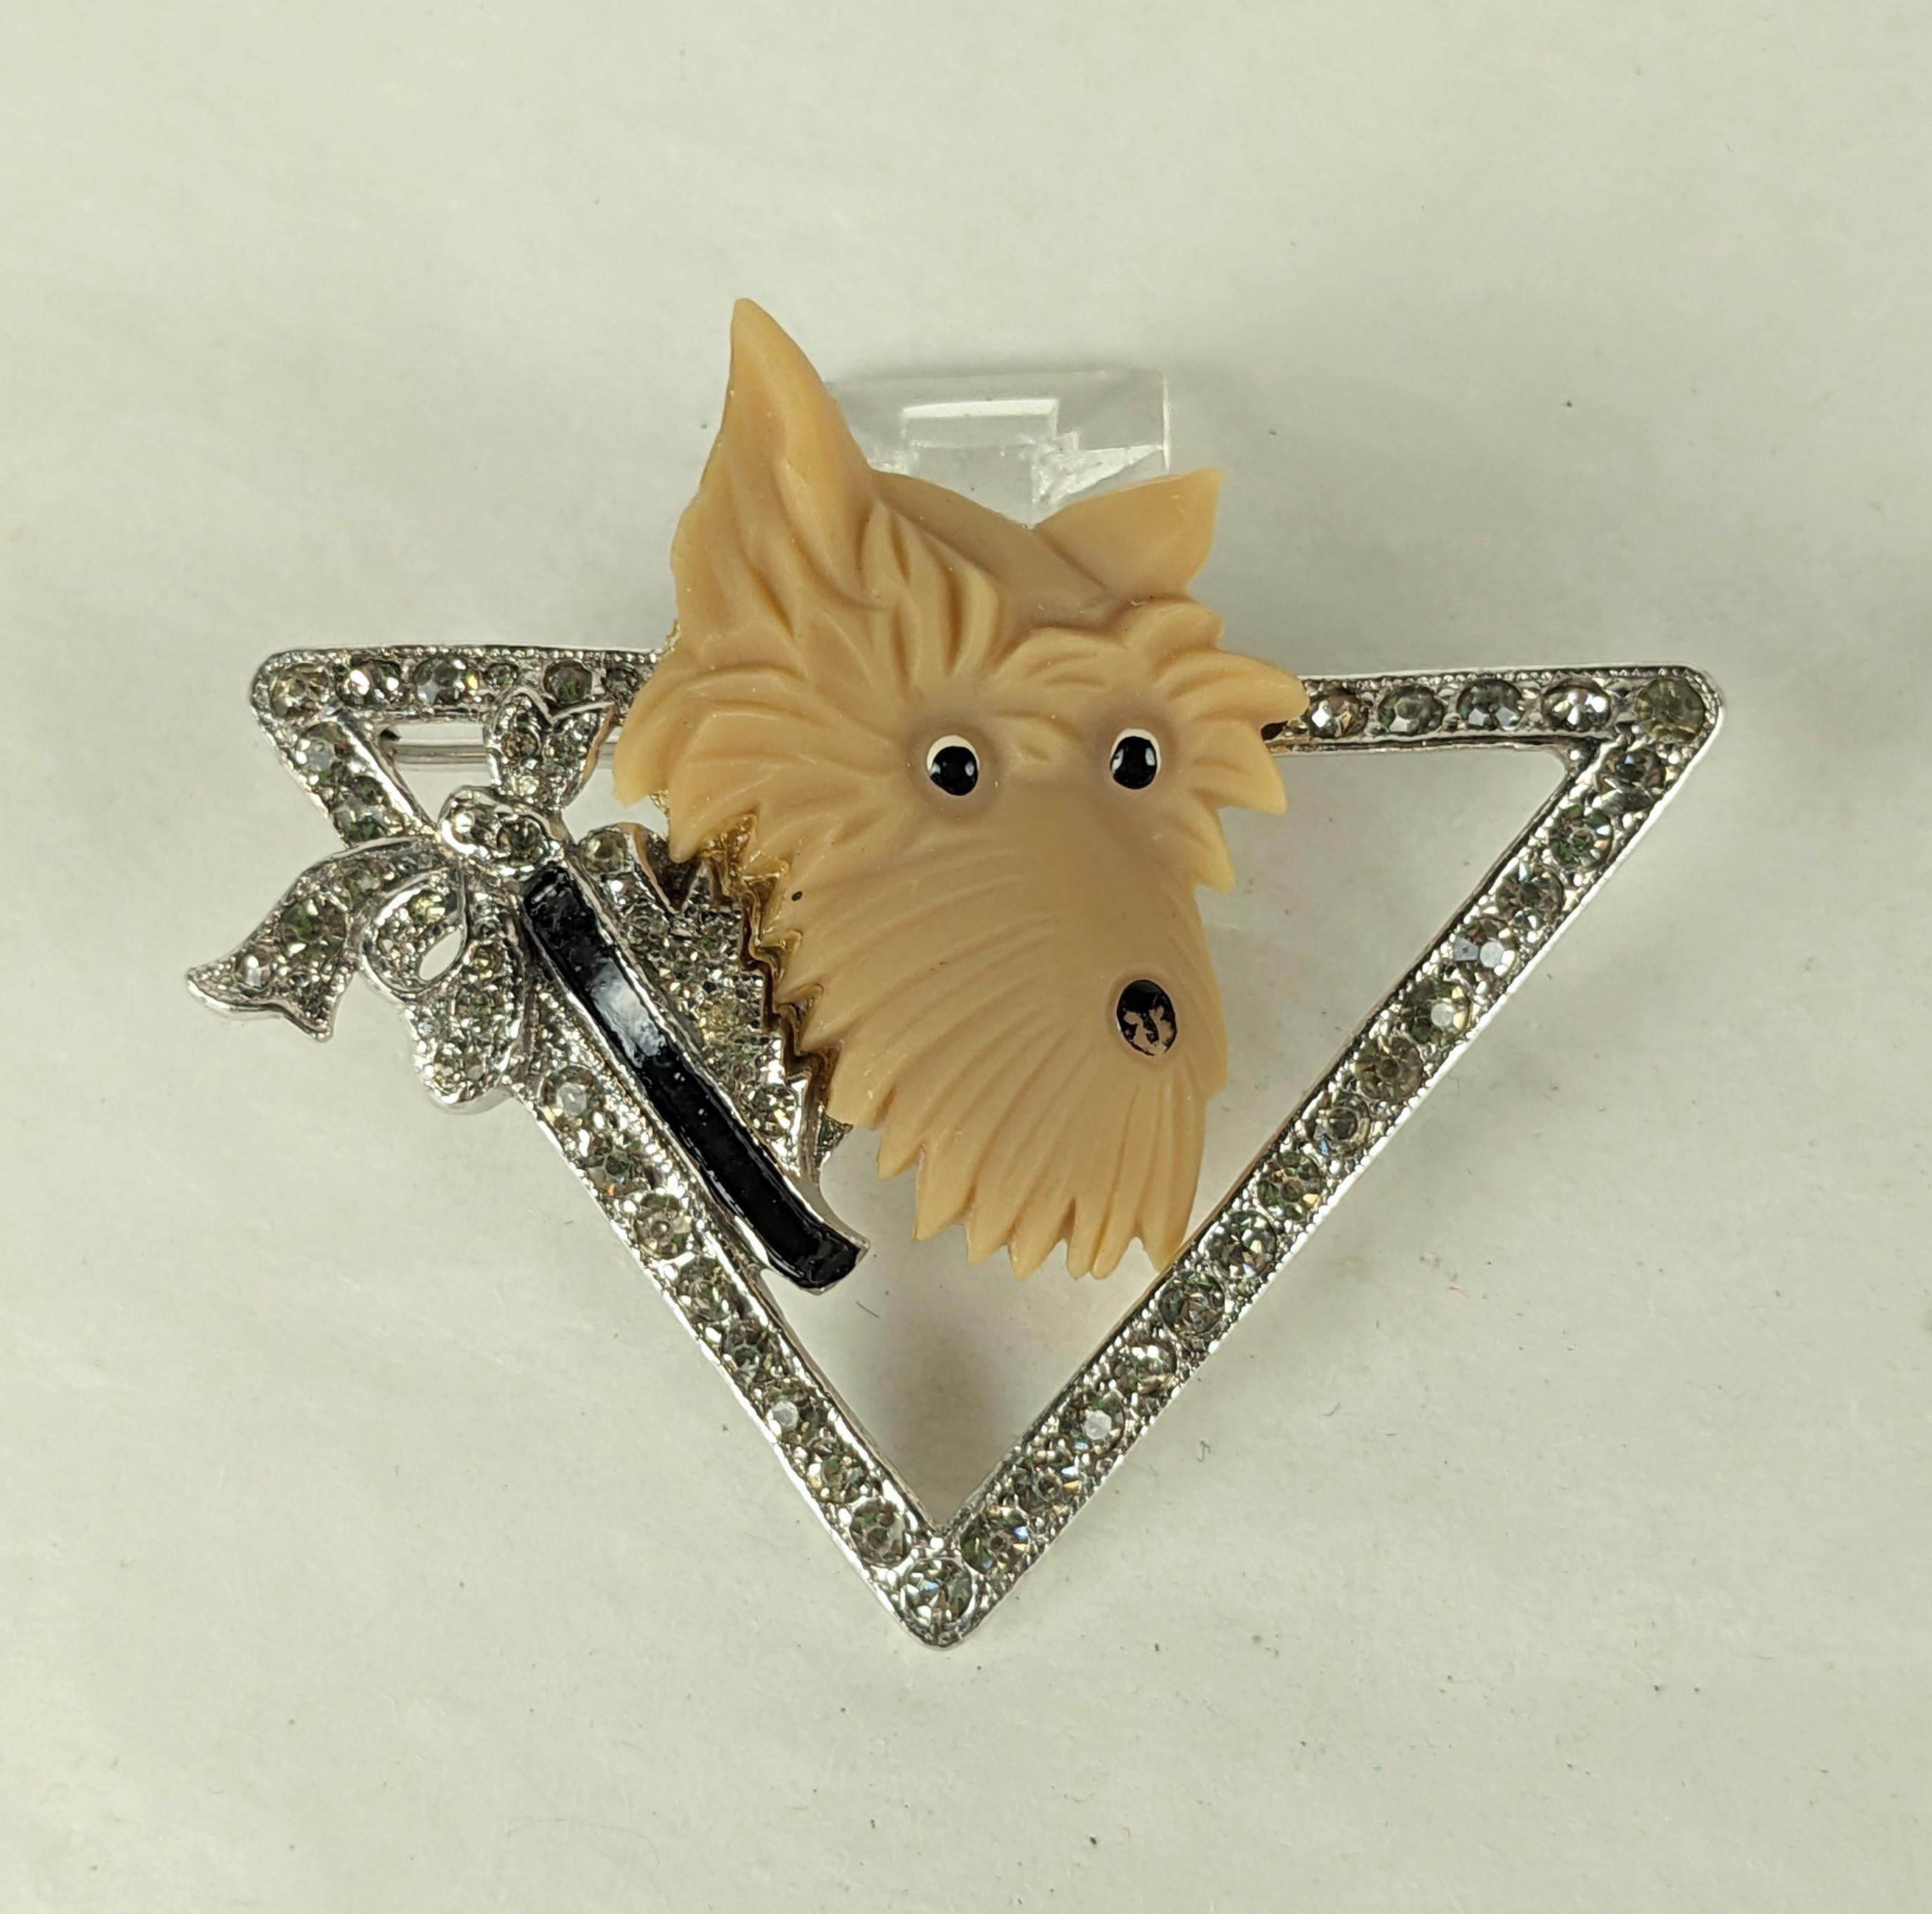 Charming Coro Art Deco Bakelite and Pave Scottie Brooch set in rhodium with cold enamel accents. Signed. 2